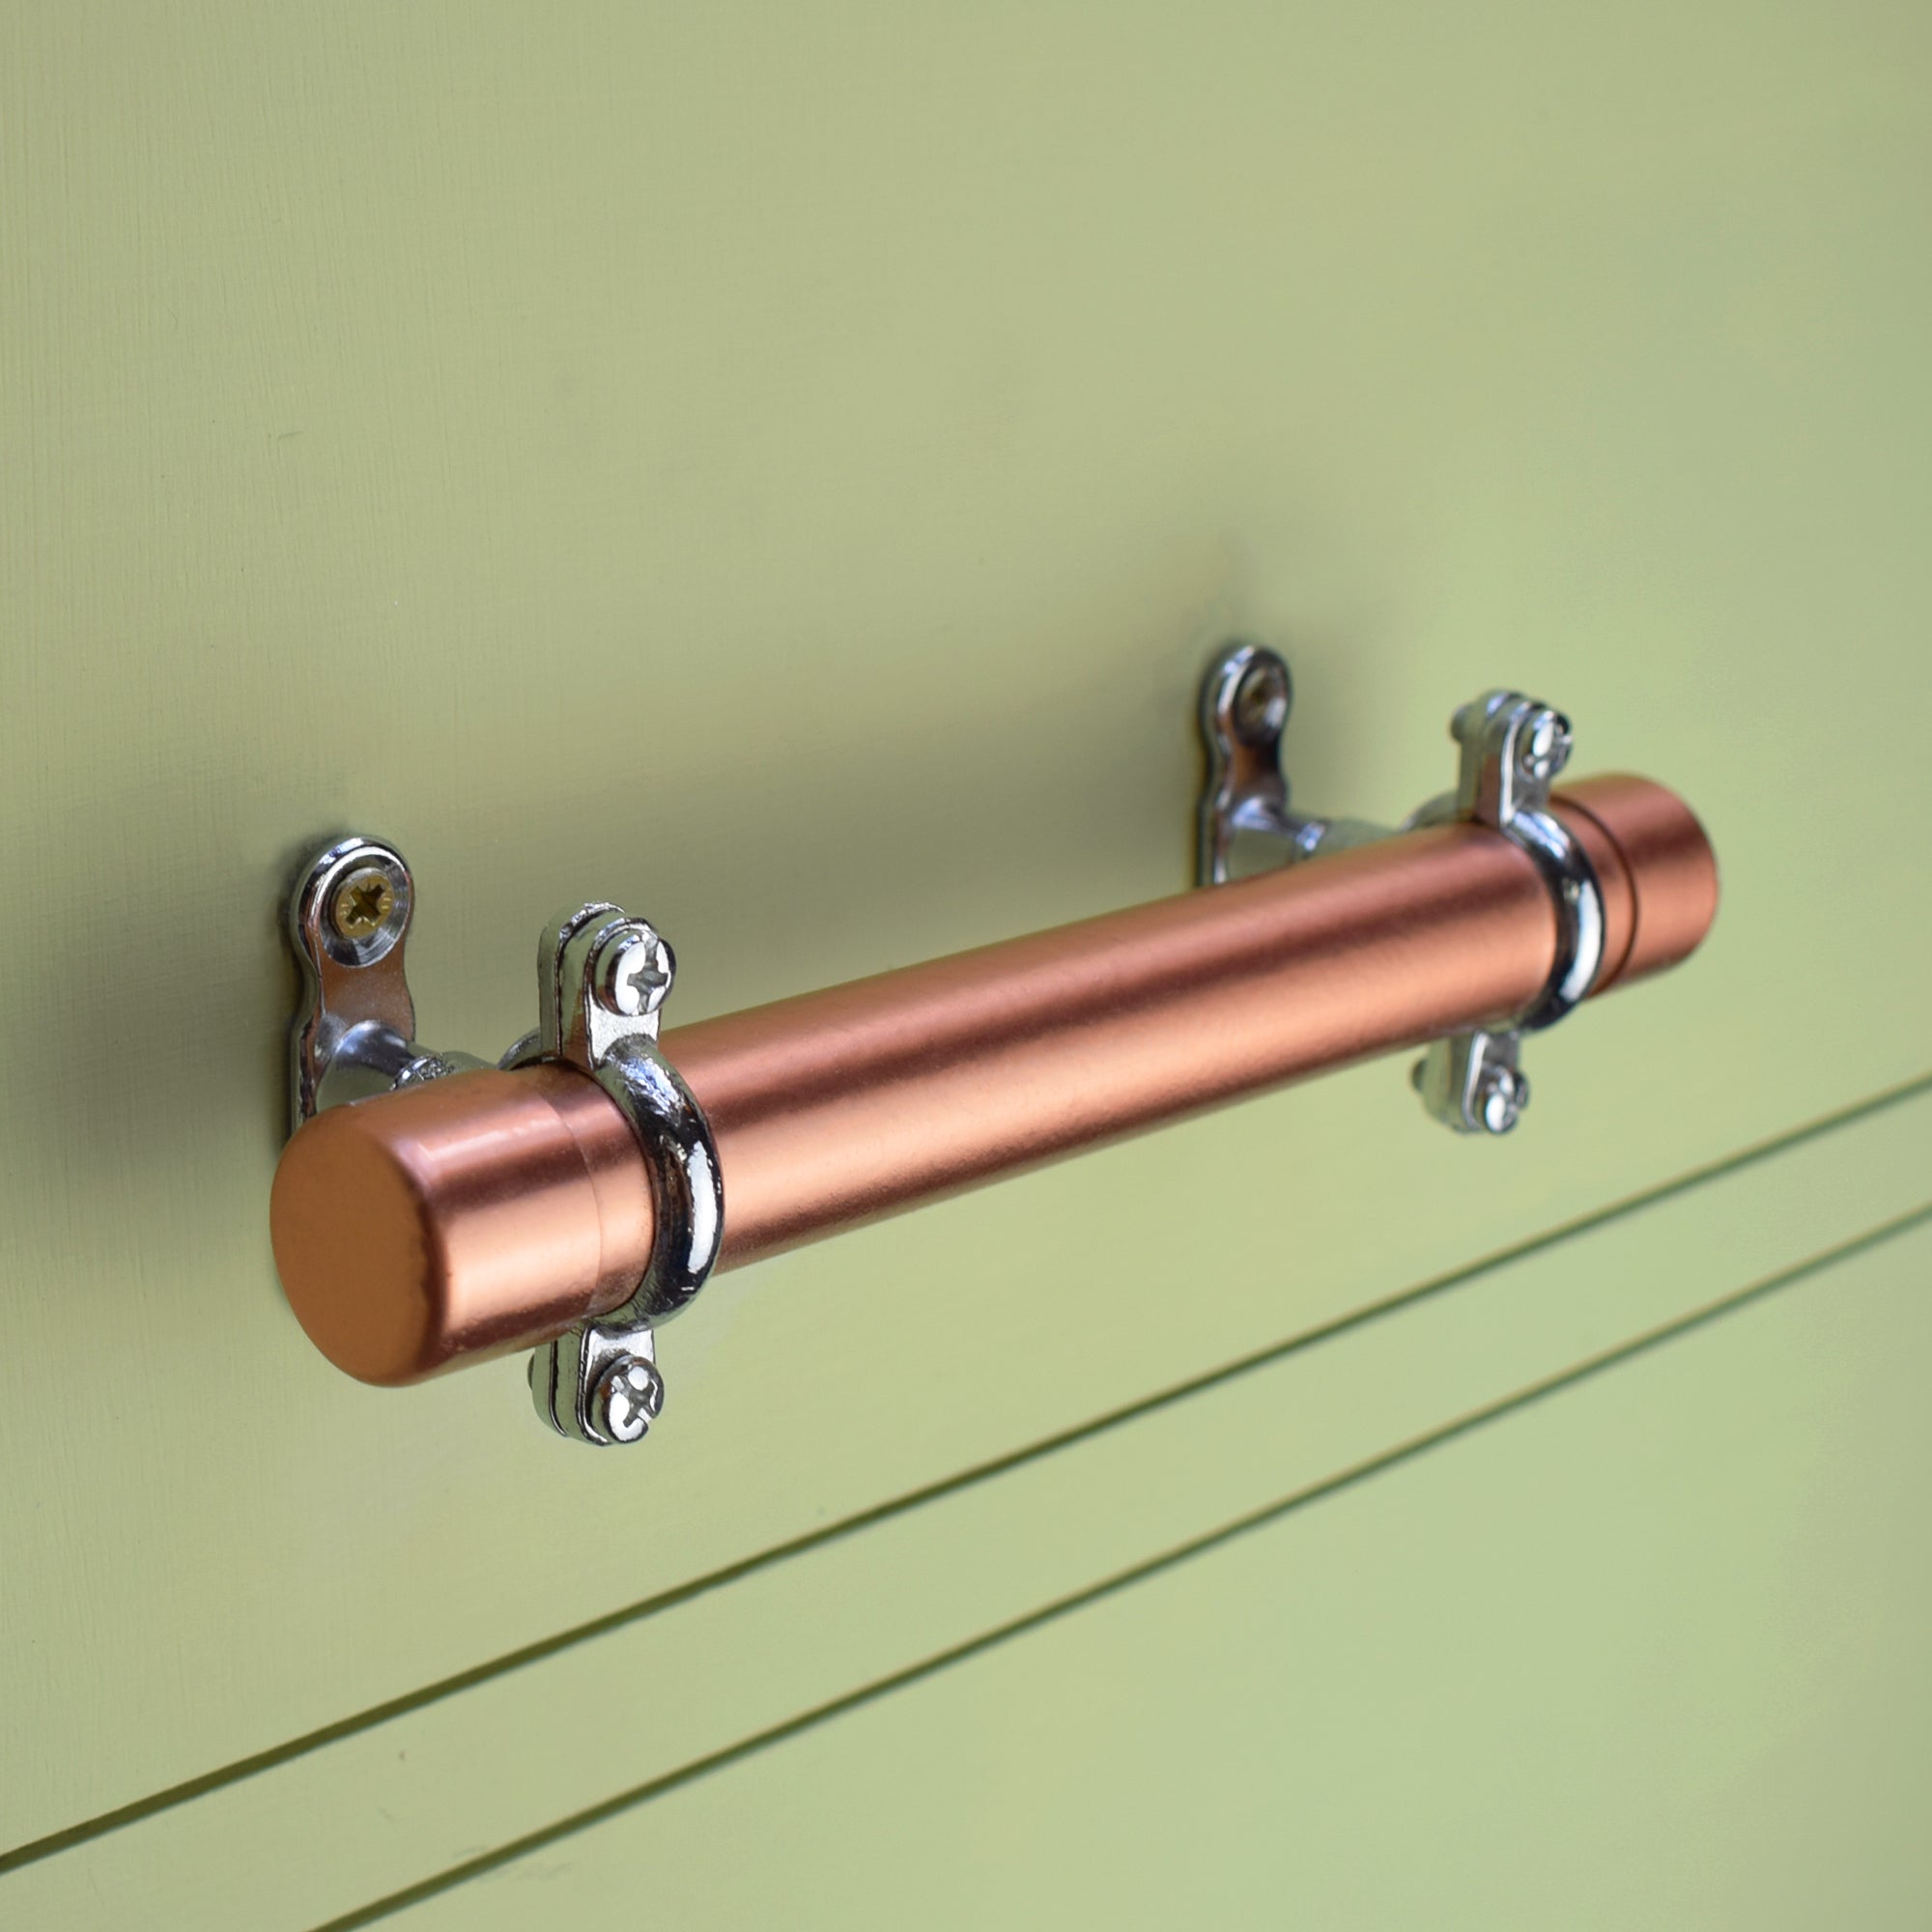 Copper Handle with Chrome Brackets (Thick-bodied) on green drawers - Proper Copper Design